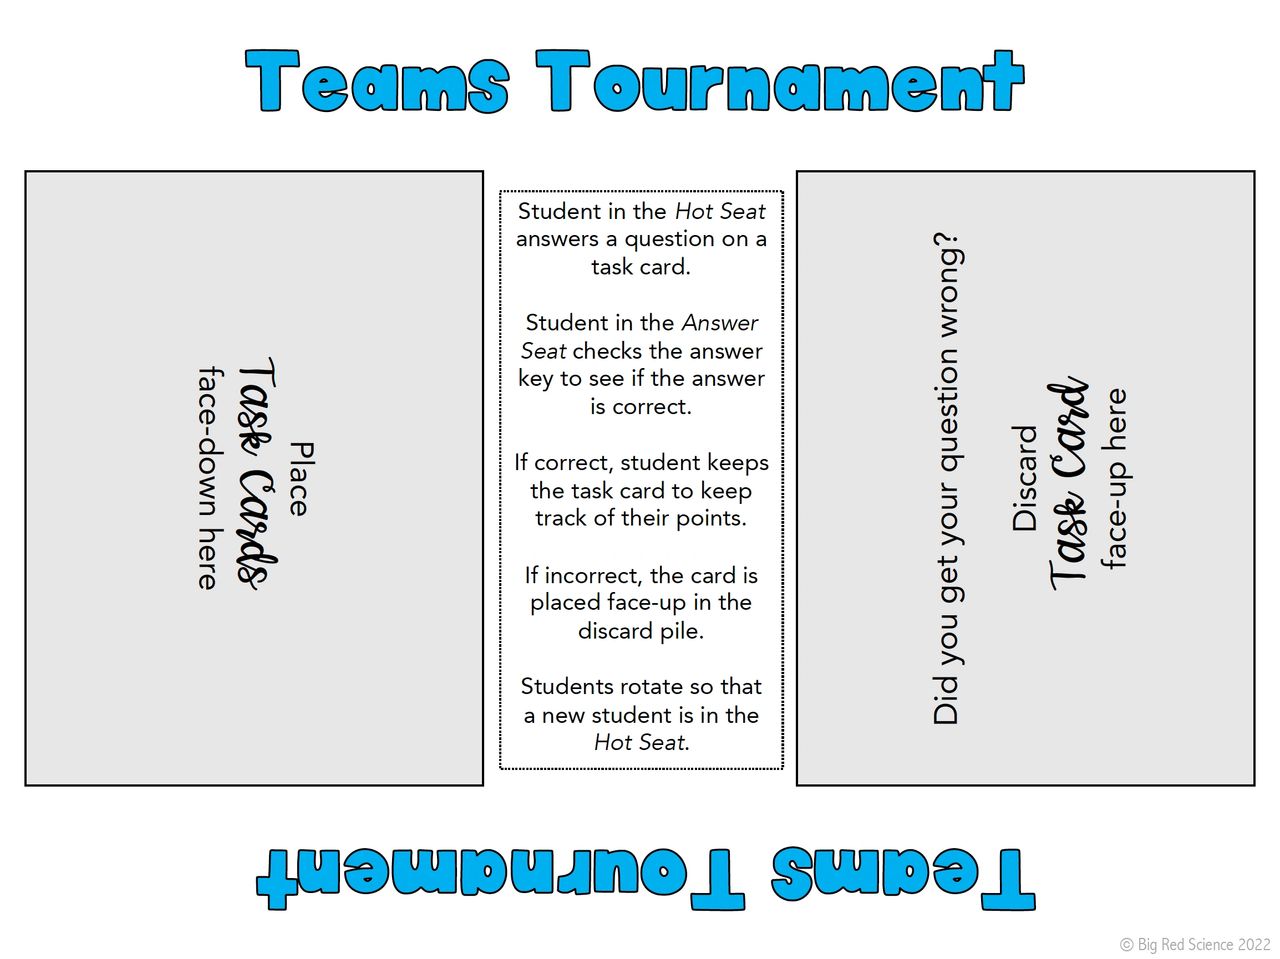 The above page can be used as a placemat during the Teams Tournament to keep everyone organized.